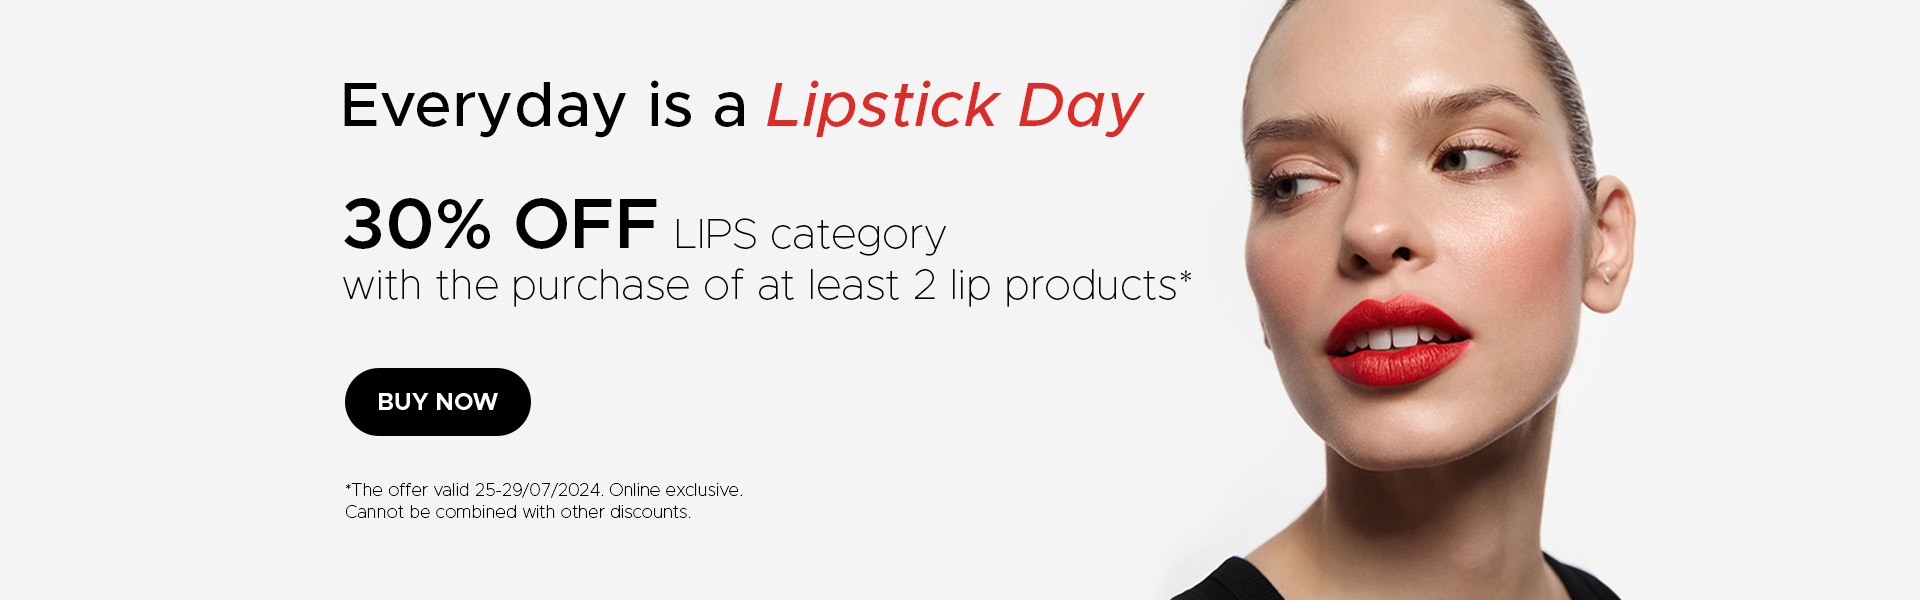 30% off the LIPS category